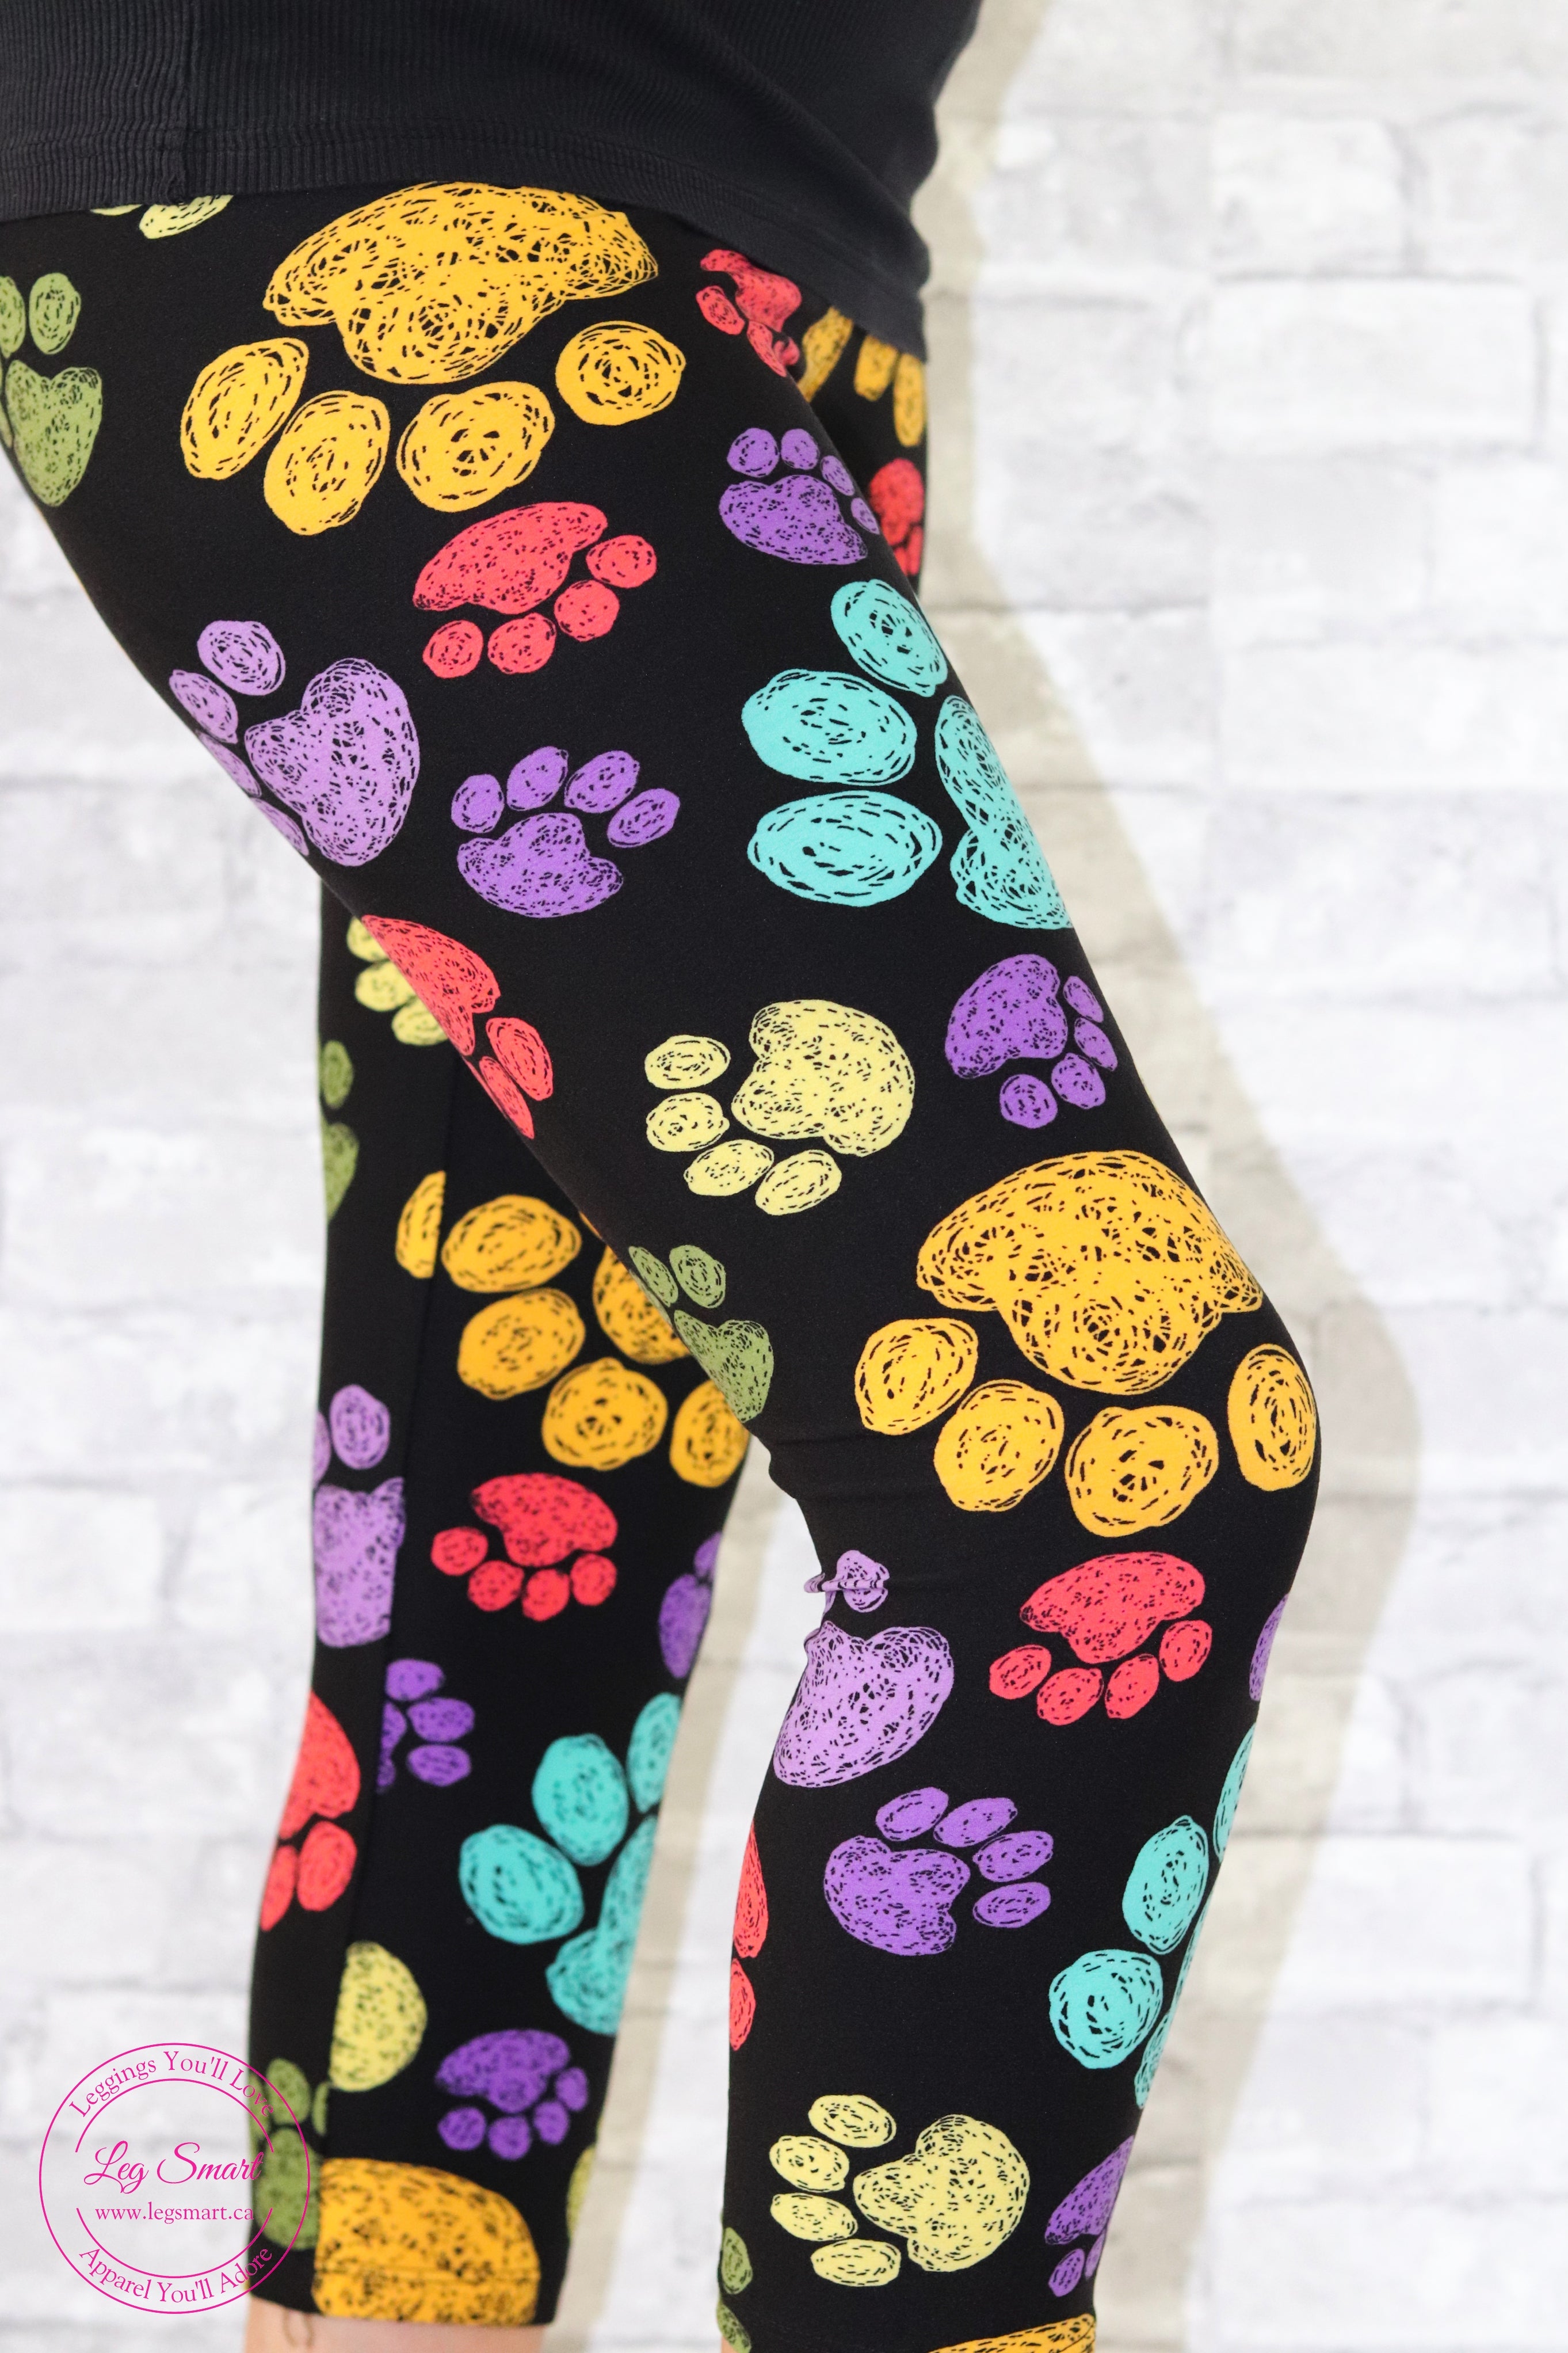 Buy Girls Legging Combo Packs Animal Printed and Solid Online at 60% OFF